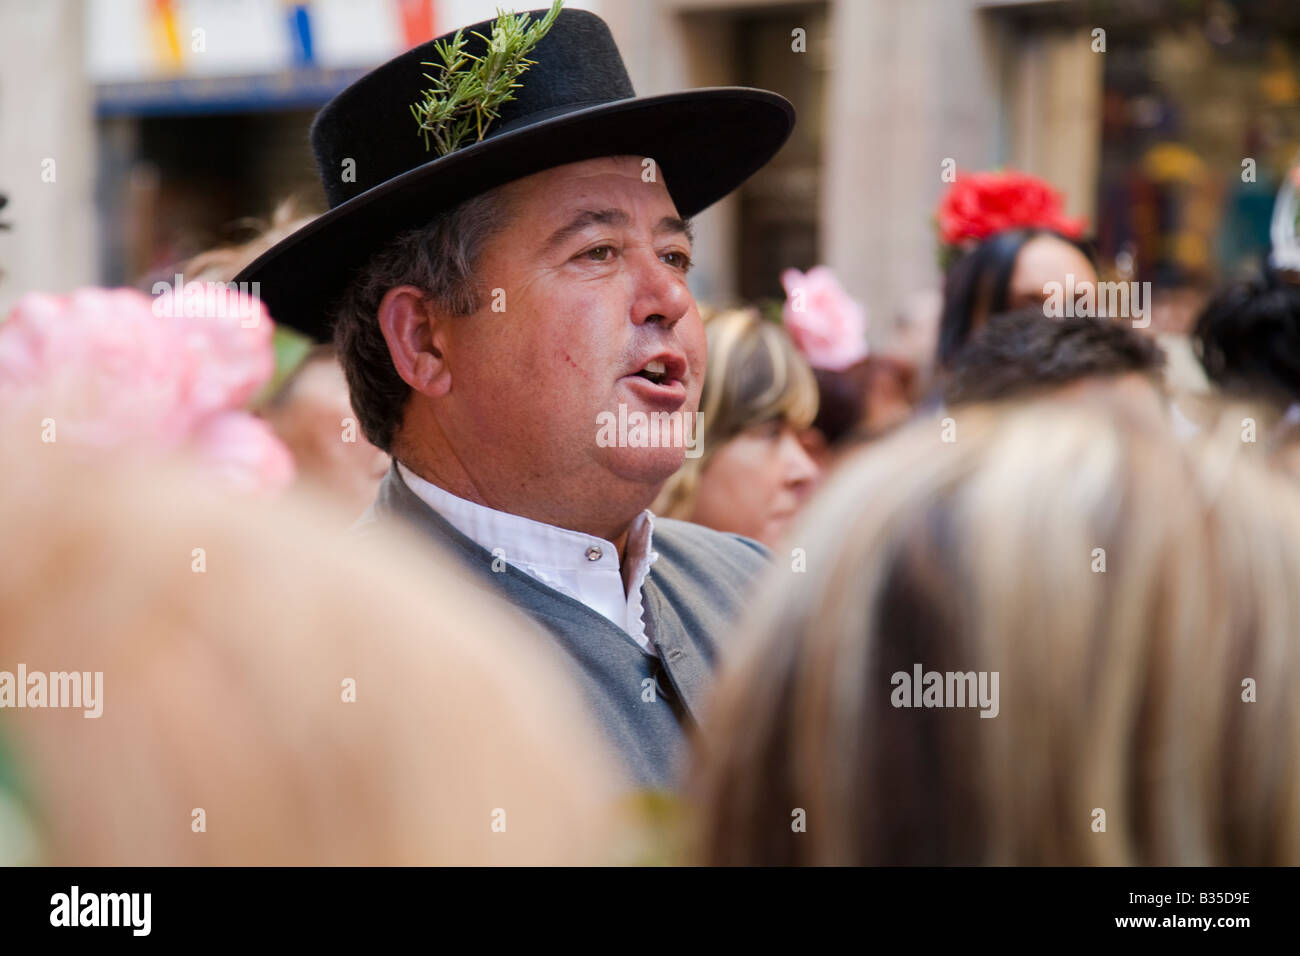 SPAIN Barcelona Man in traditional hat and suit sing as part of crowd in street Day of Ascension celebration holy day Stock Photo